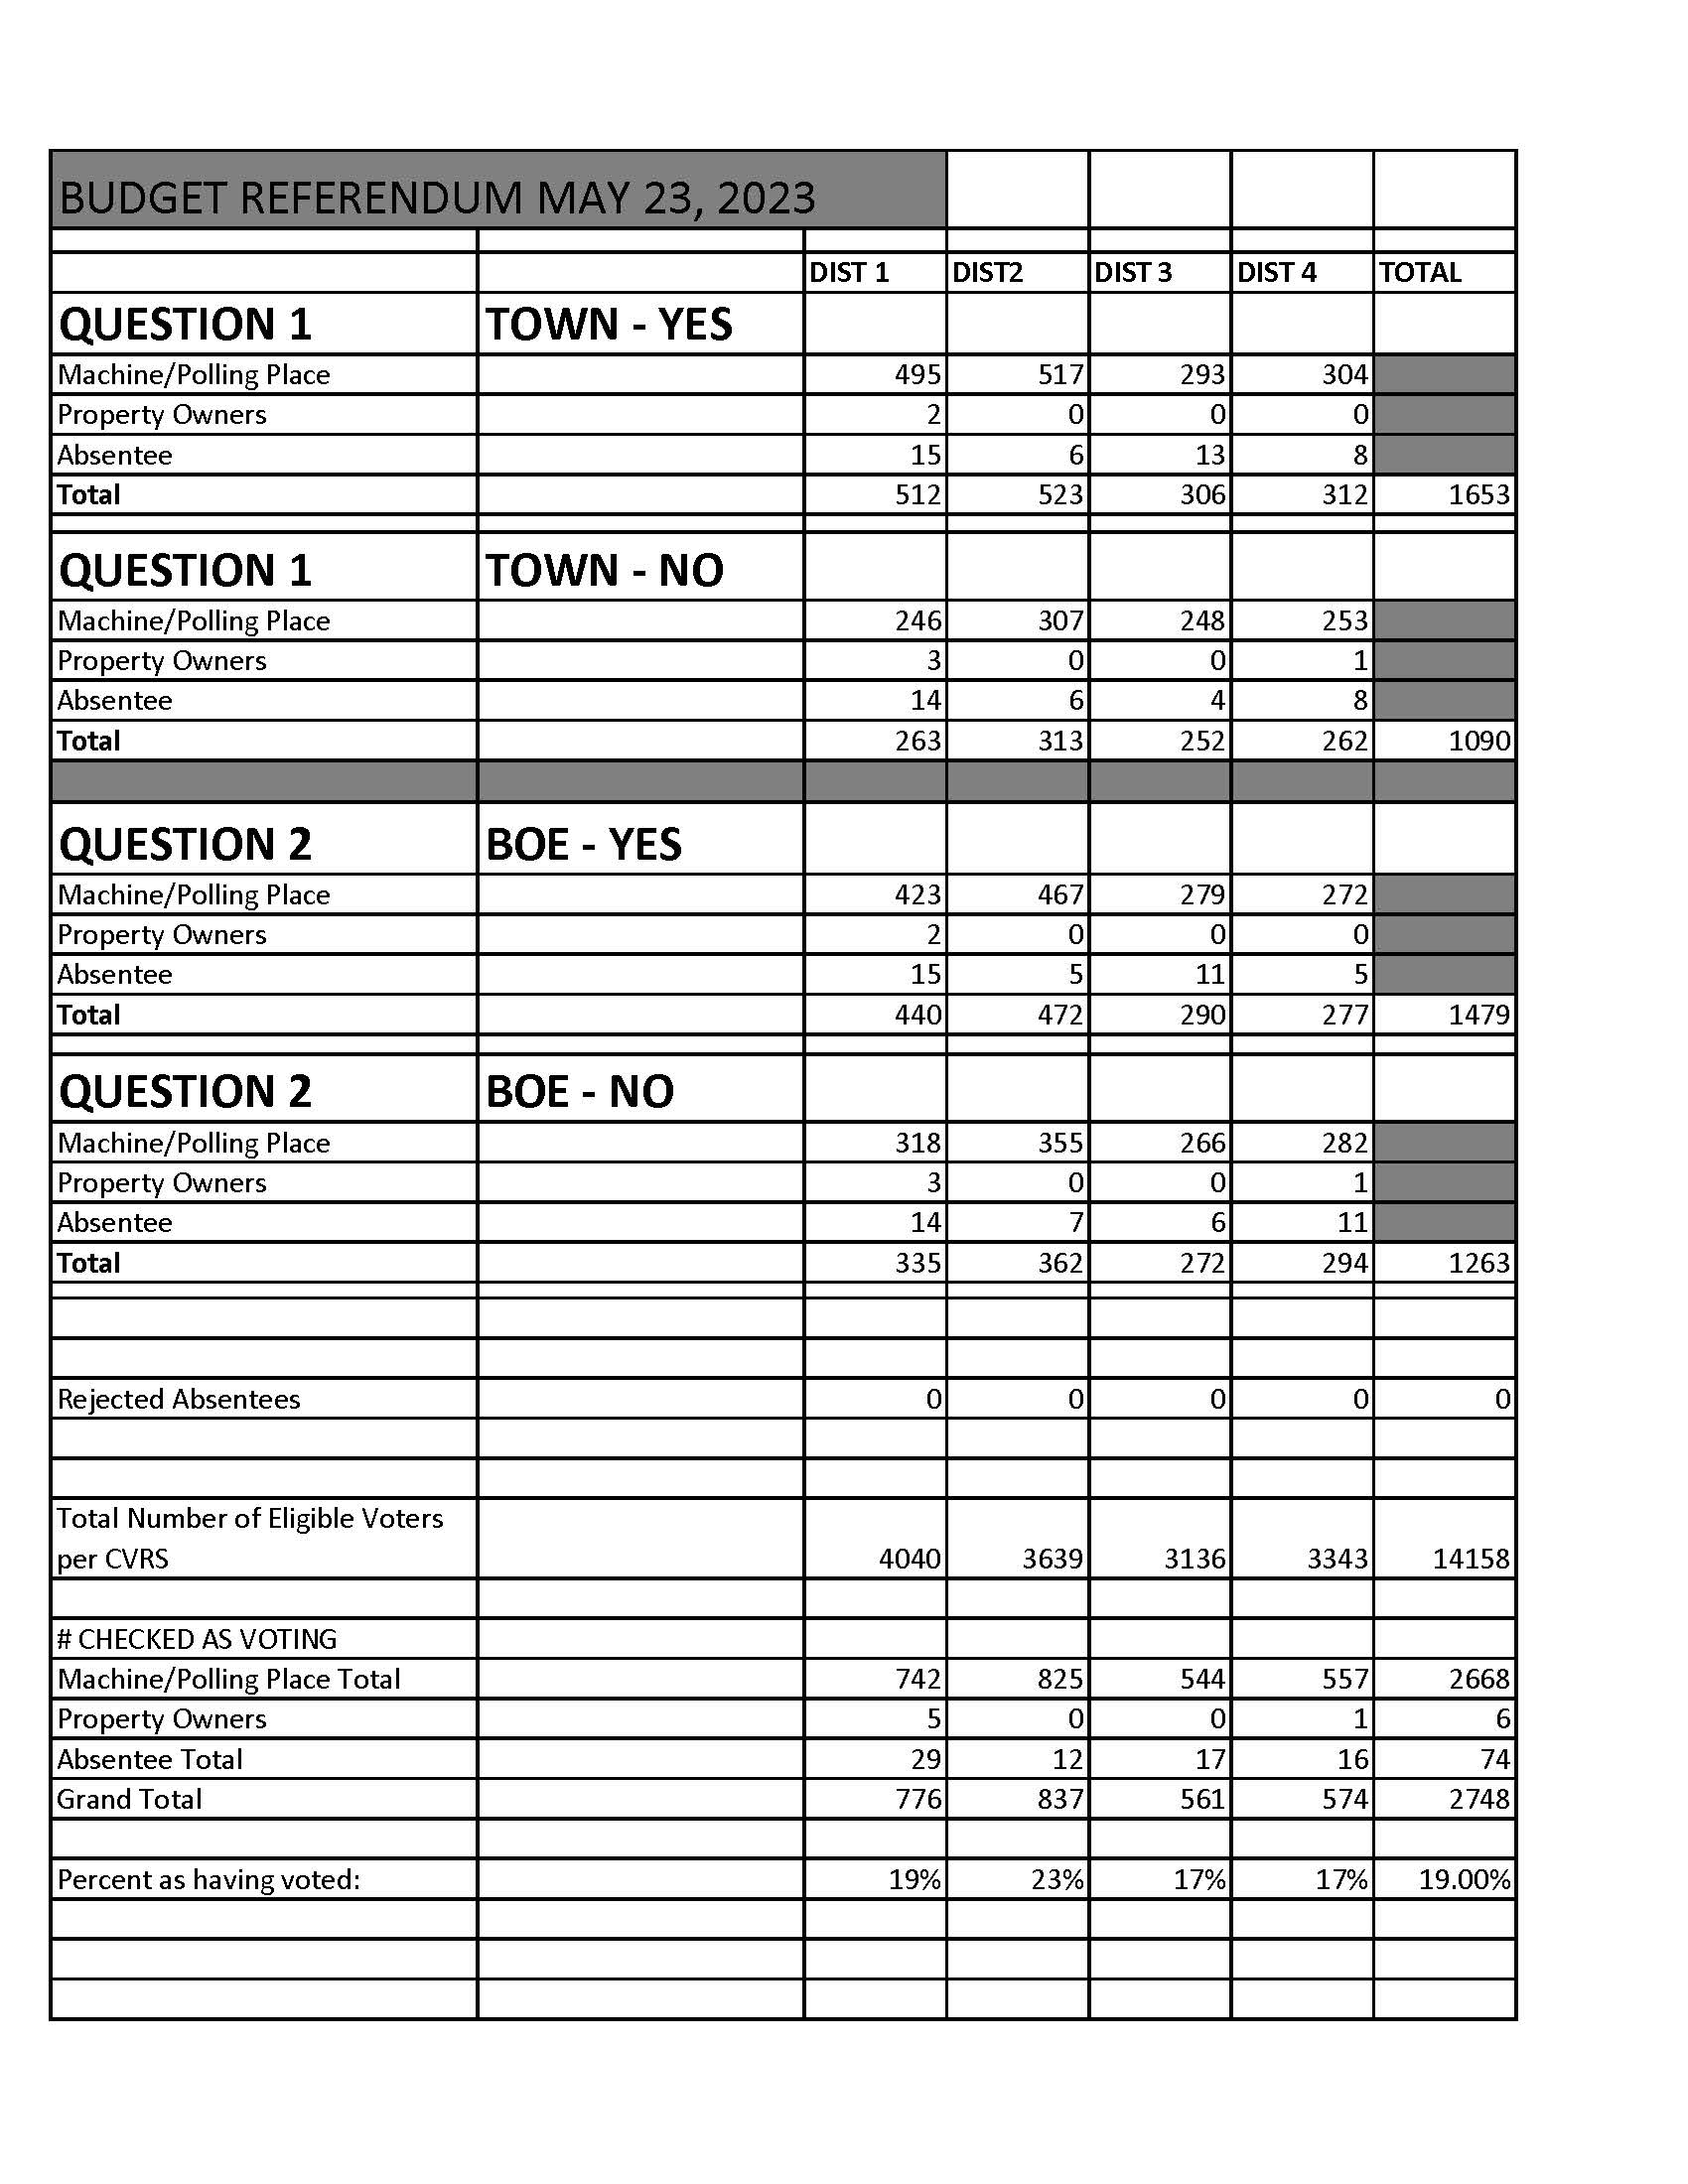 Copy of May 23 2023 Budget Referendum Results Spreadsheet_Page_1